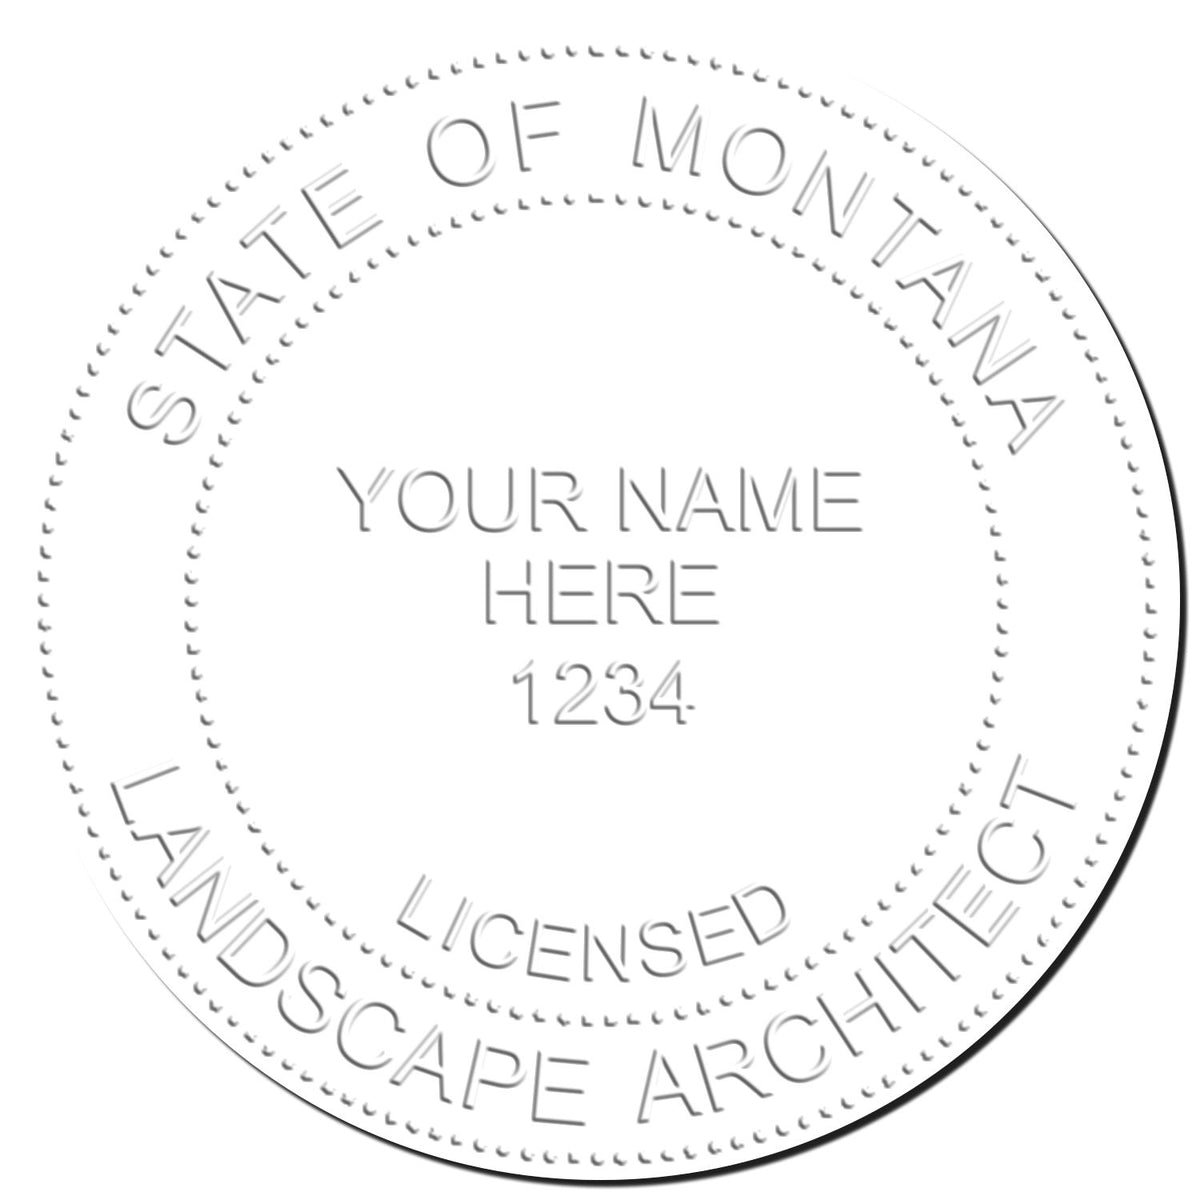 This paper is stamped with a sample imprint of the Gift Montana Landscape Architect Seal, signifying its quality and reliability.